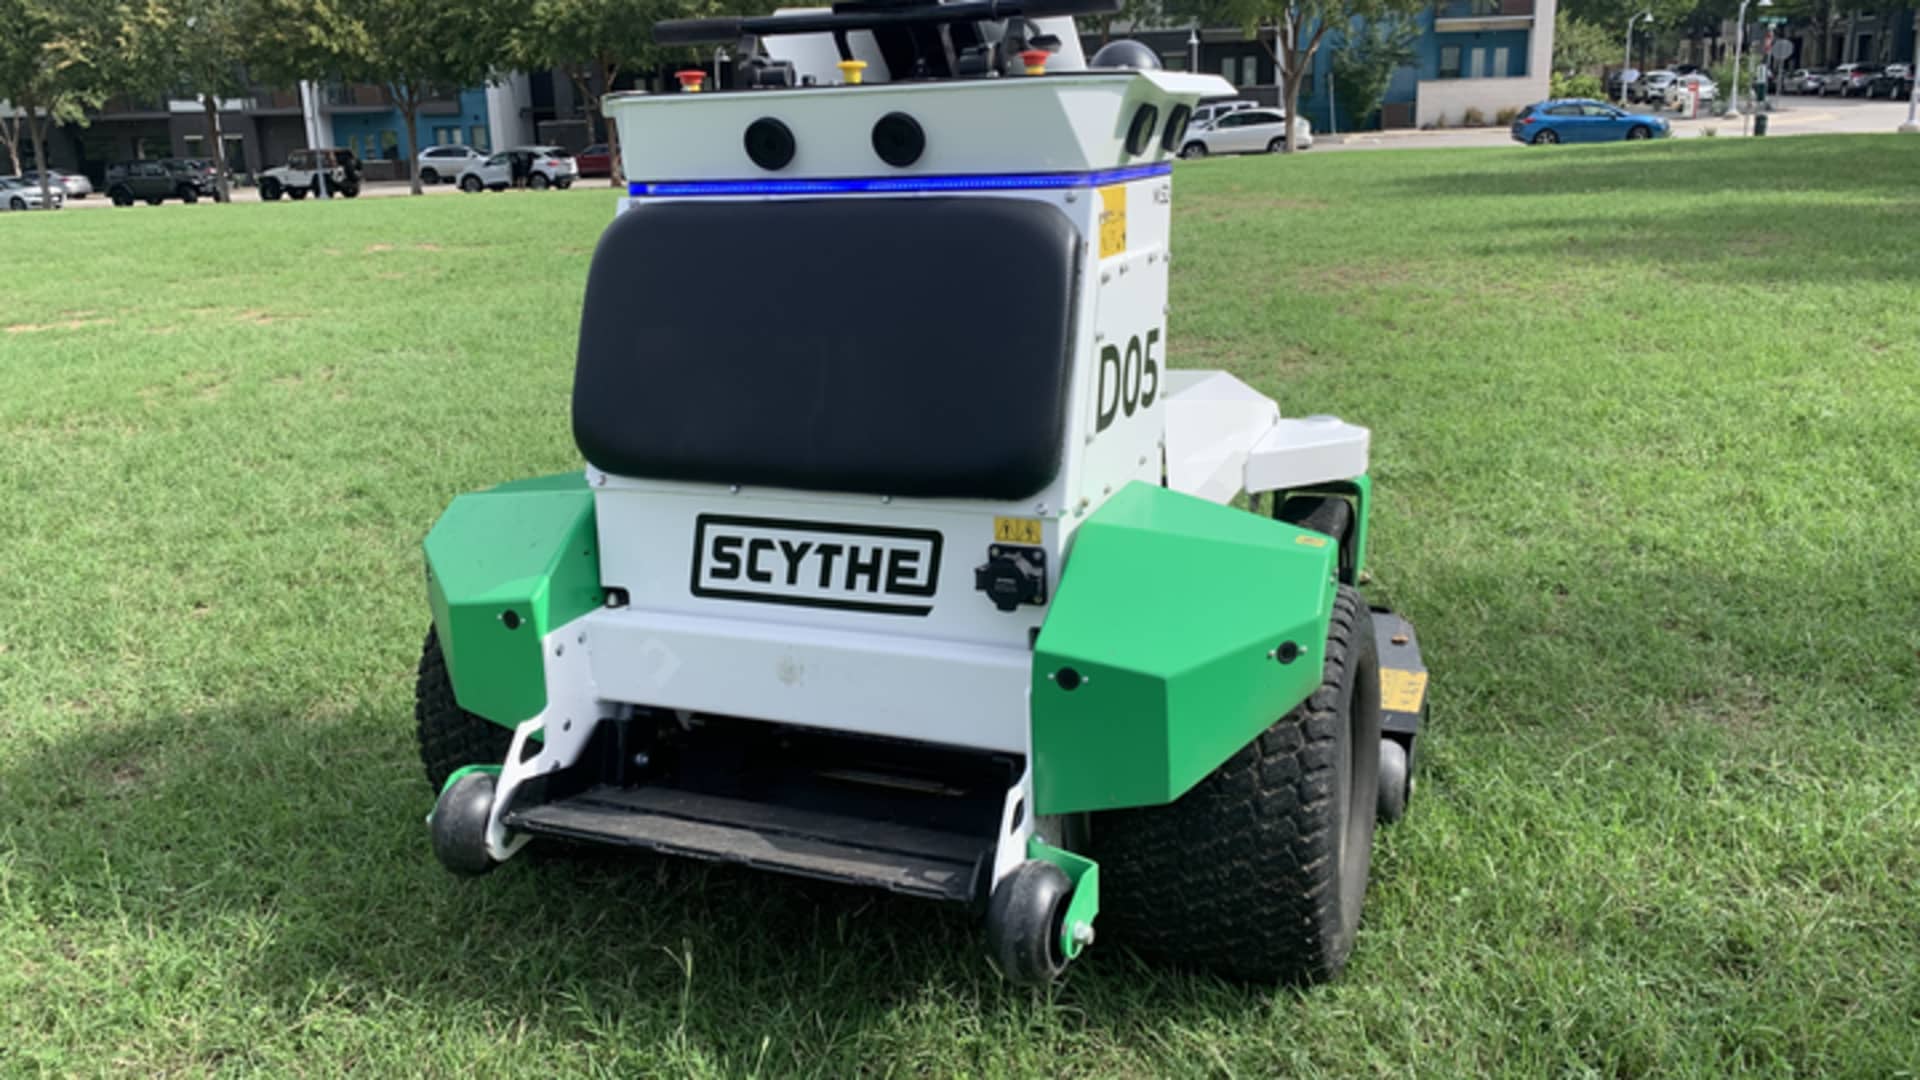 These riderless electric lawn mowers can run on their own for 10 hours